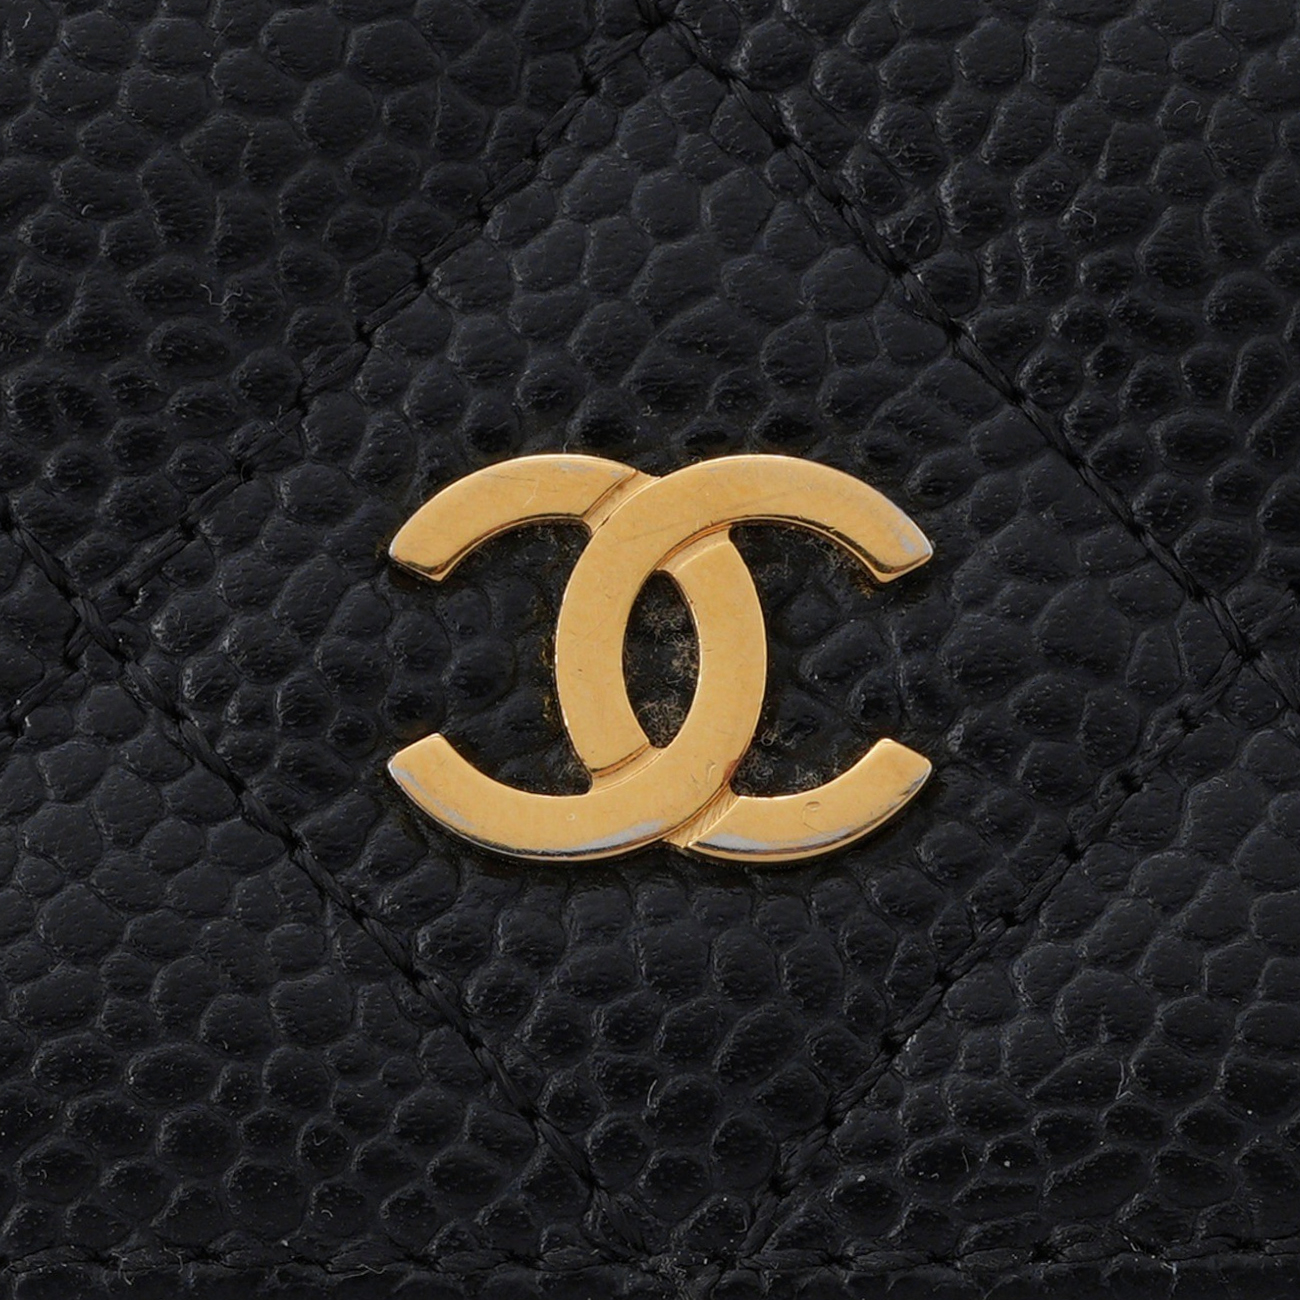 CHANEL(USED)샤넬 클래식 반지갑 A48980